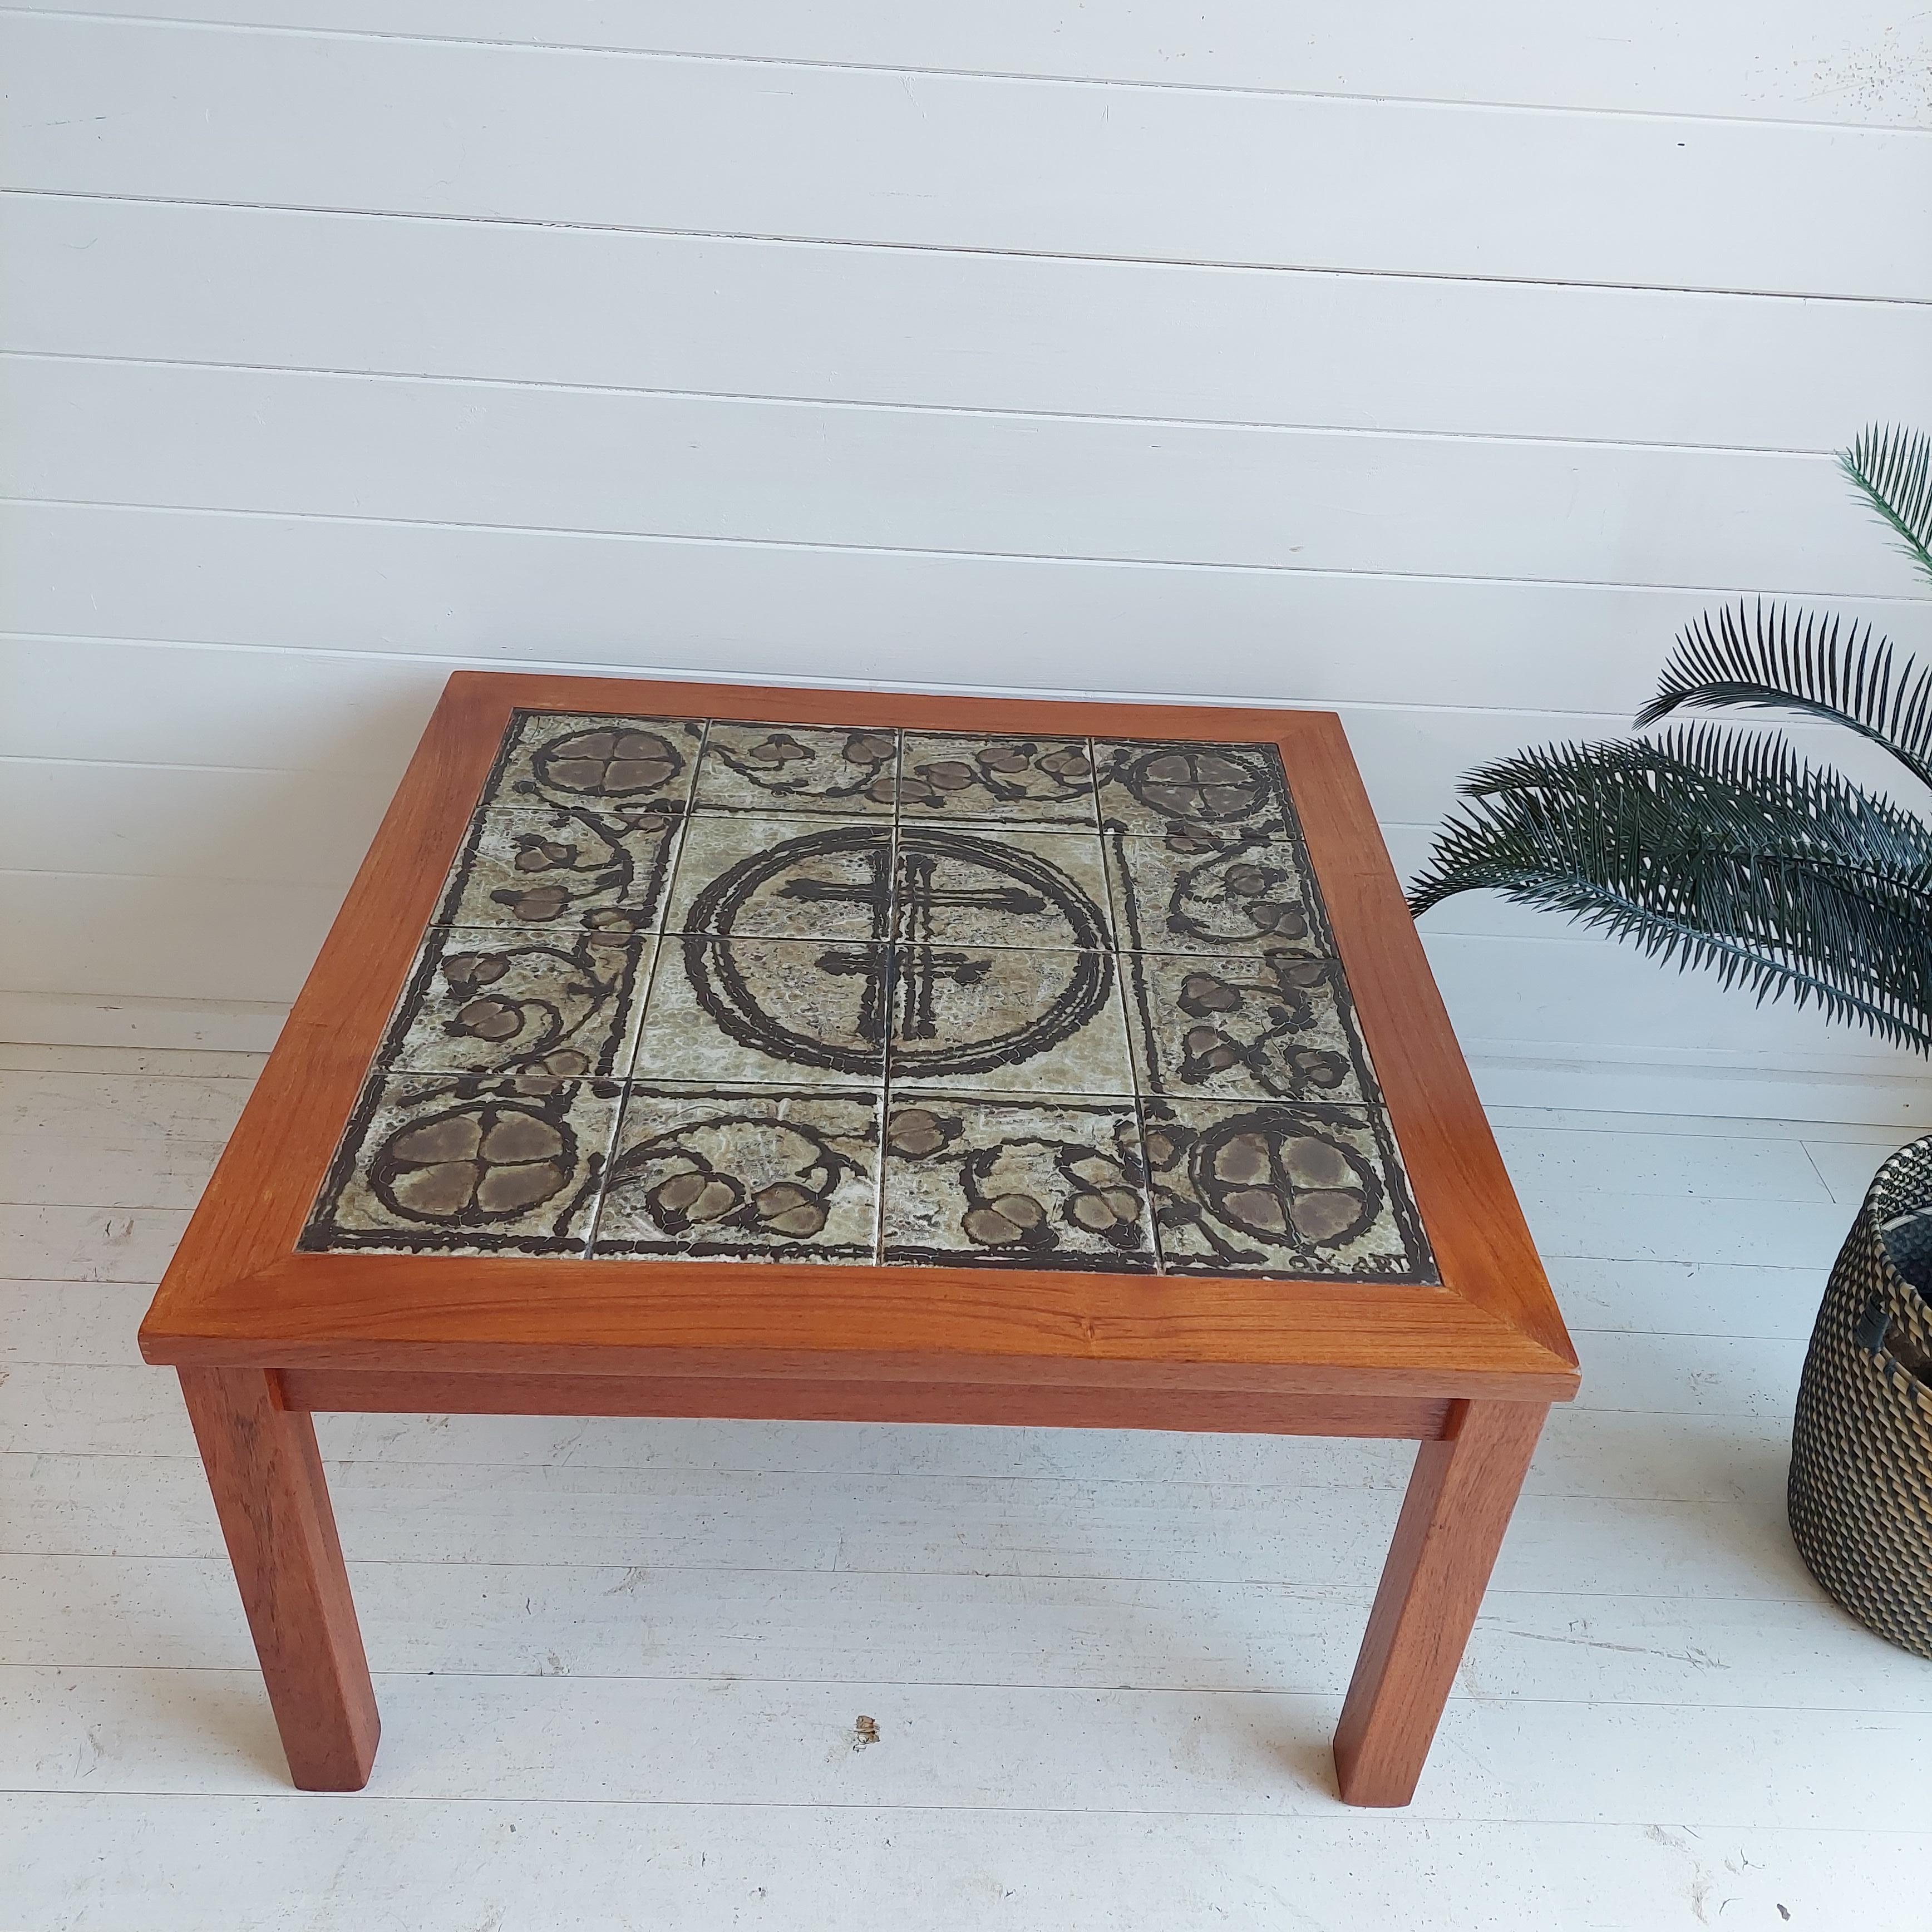 Charming ceramic tile and high quality wooden coffee or side table by Ox-art Denmark.

This rustic, square coffee table has a high quality wooden with aluminium base.
The ceramics top has a nice pattern on it, which gives the piece a high